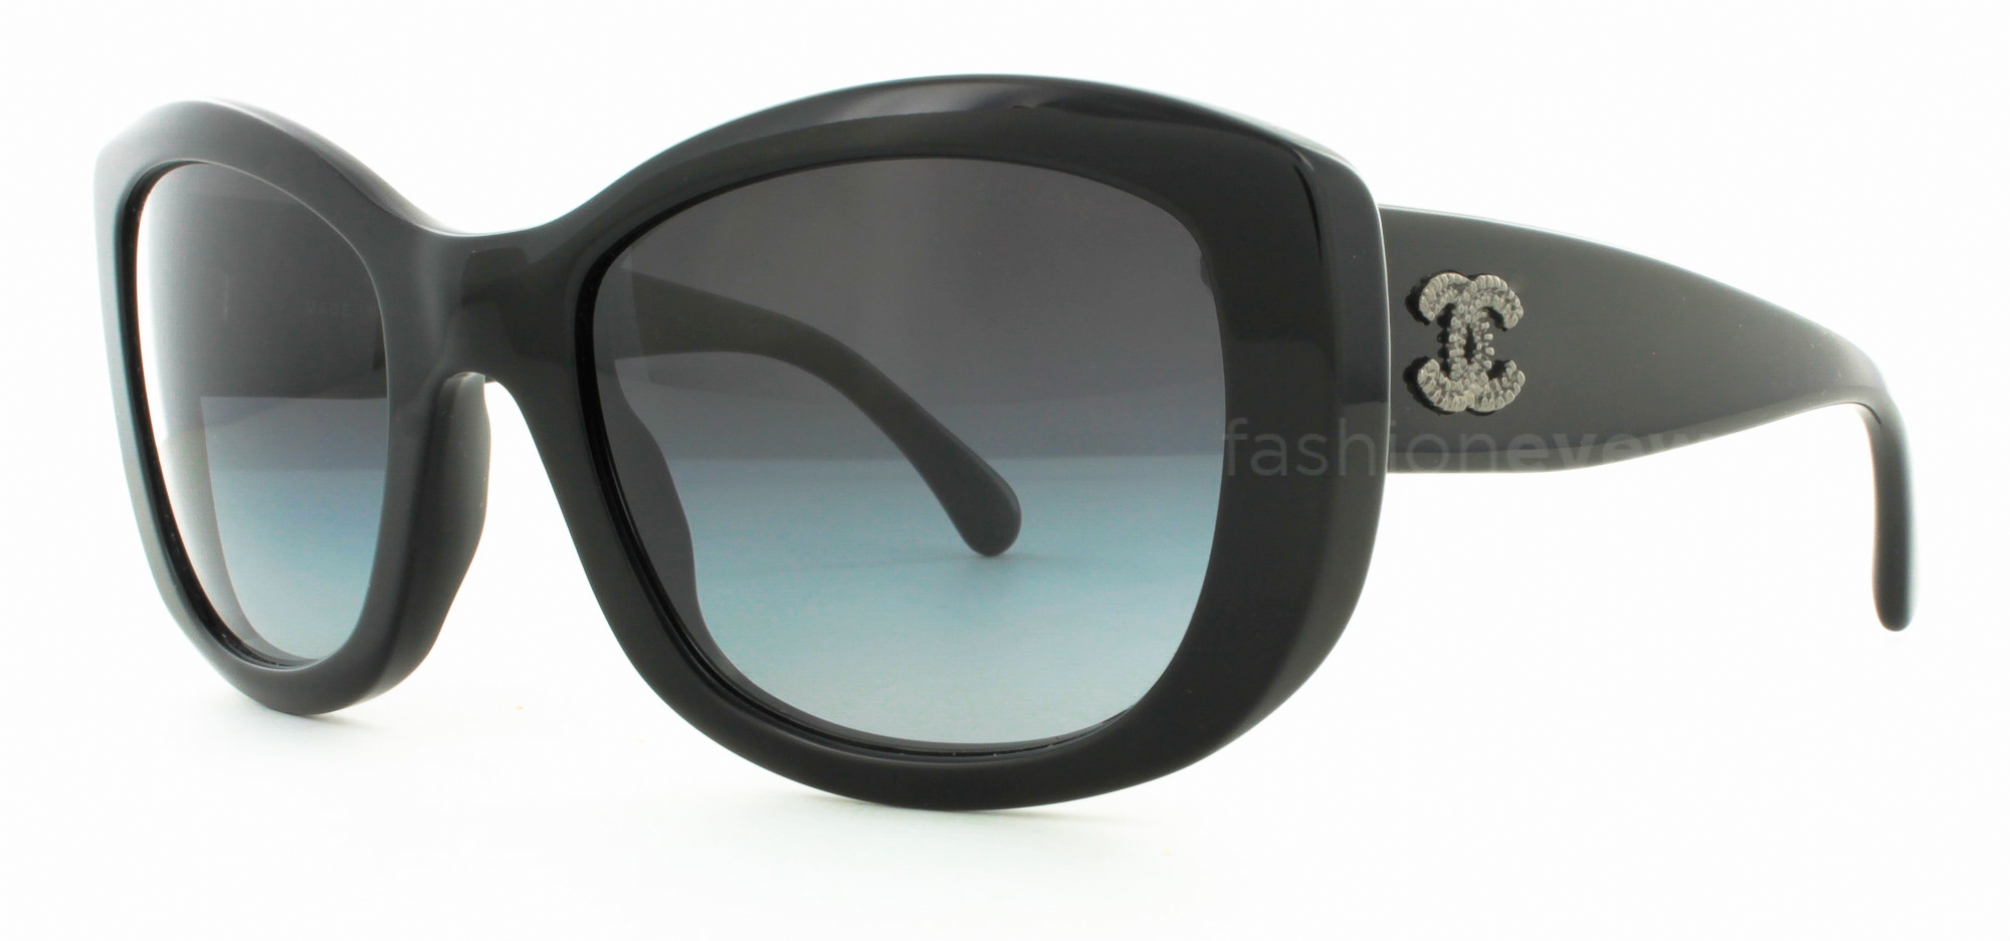 Buy Chanel Sunglasses directly from OpticsFast.com